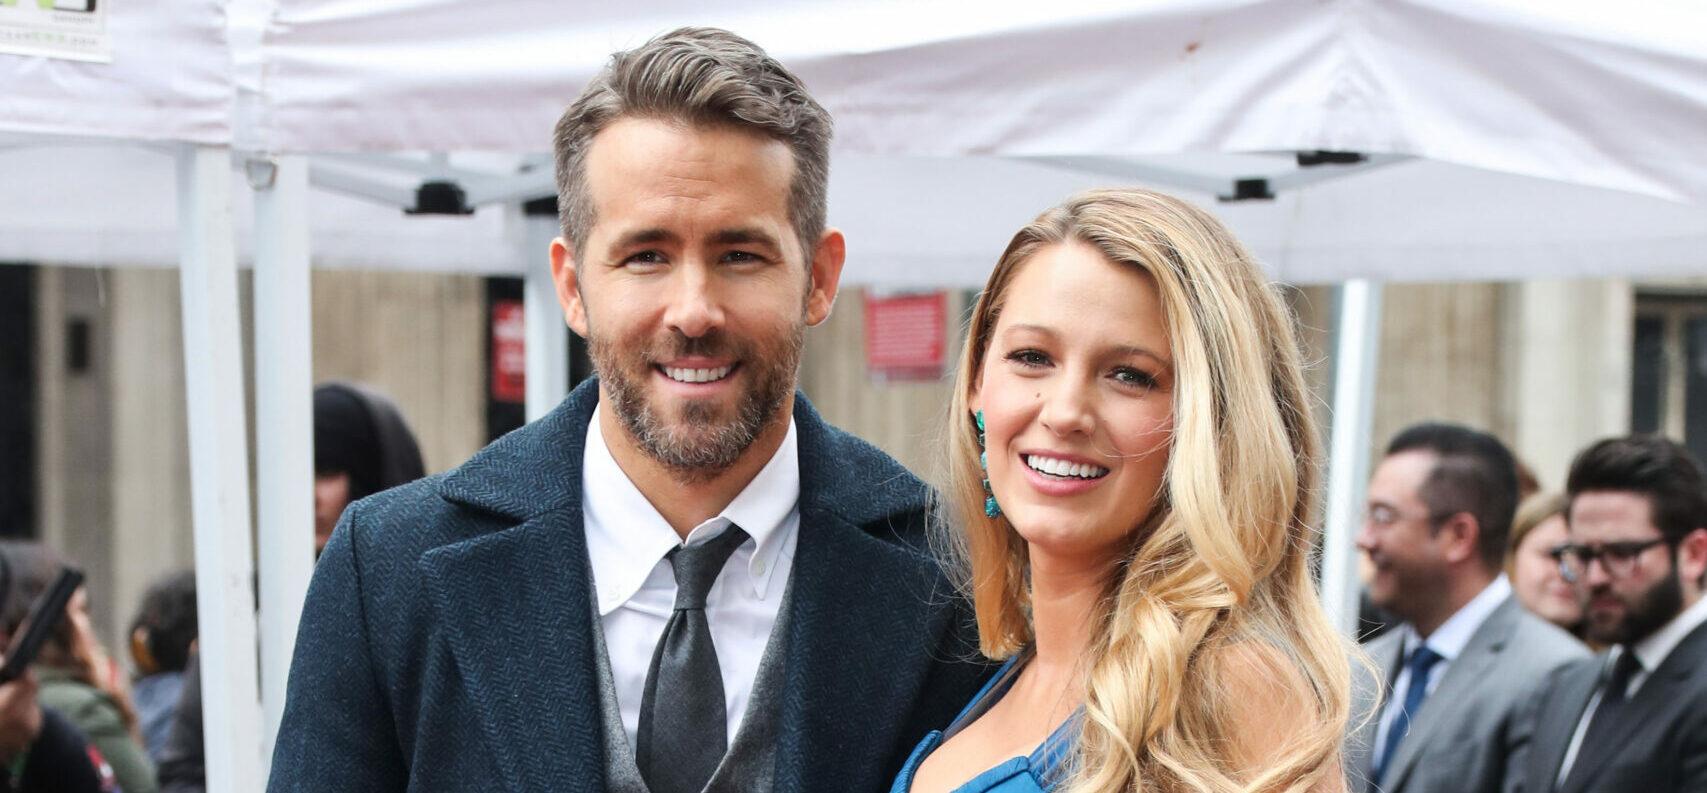 Pregnant Blake Lively Jokes That Her Workout Routine ‘Isn’t Working’